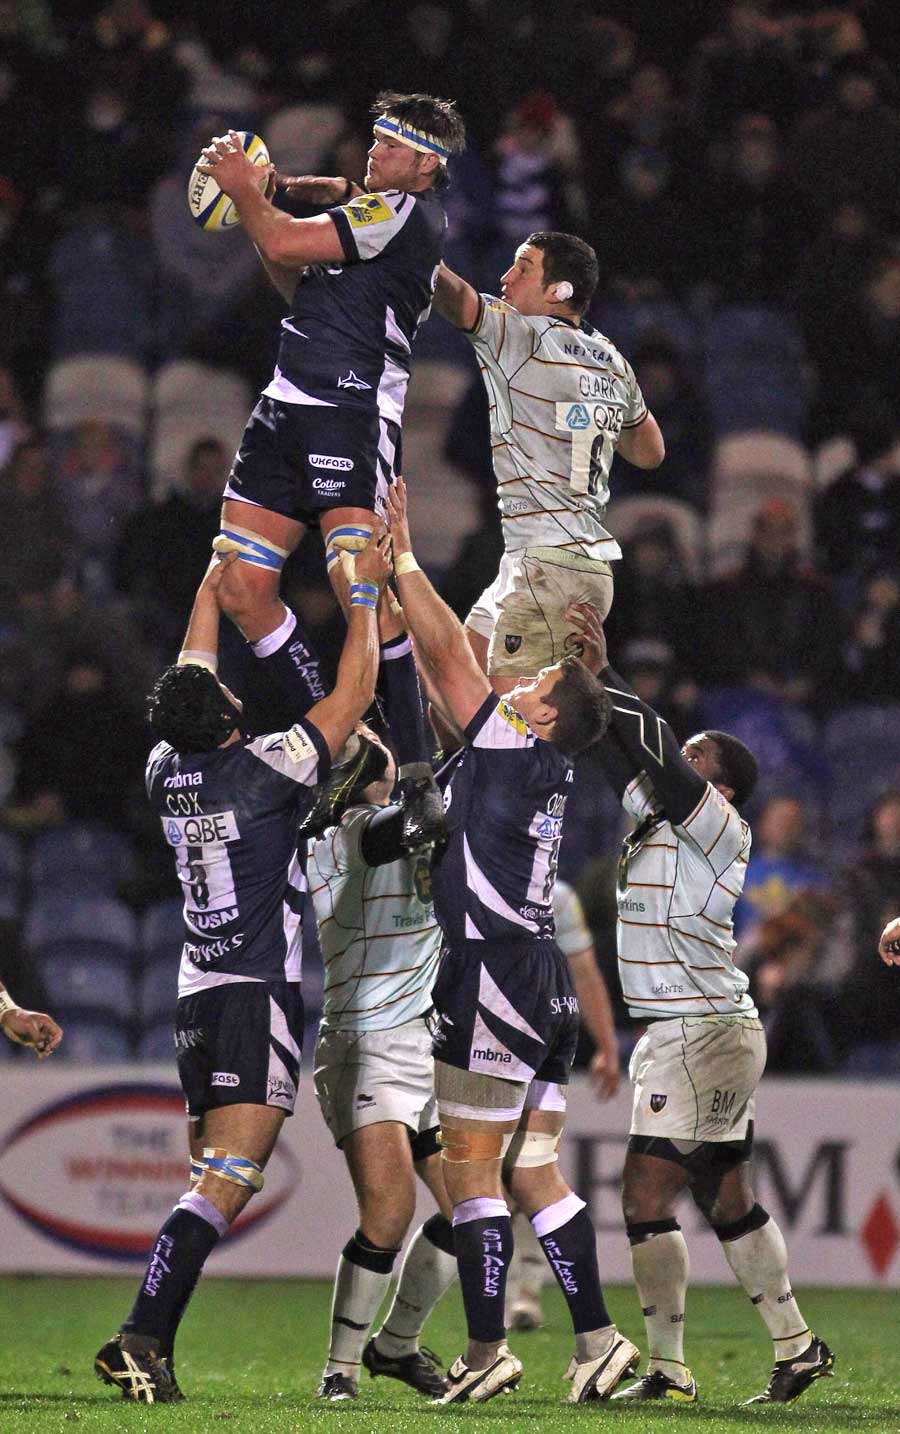 Sale's Nic Rouse claims a lineout ball